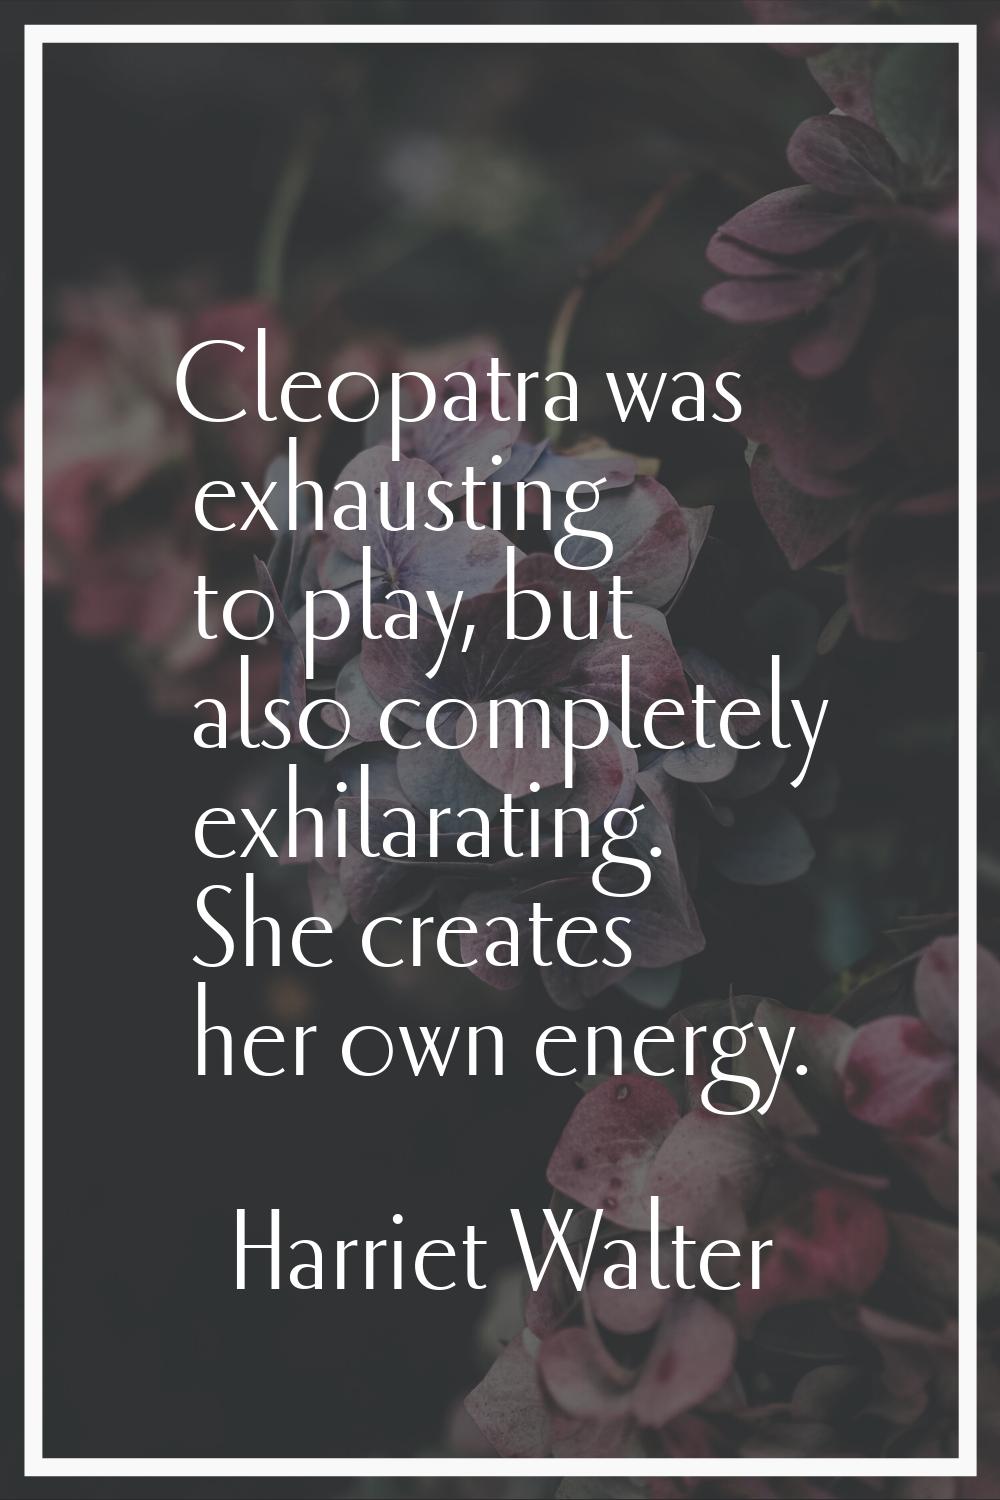 Cleopatra was exhausting to play, but also completely exhilarating. She creates her own energy.